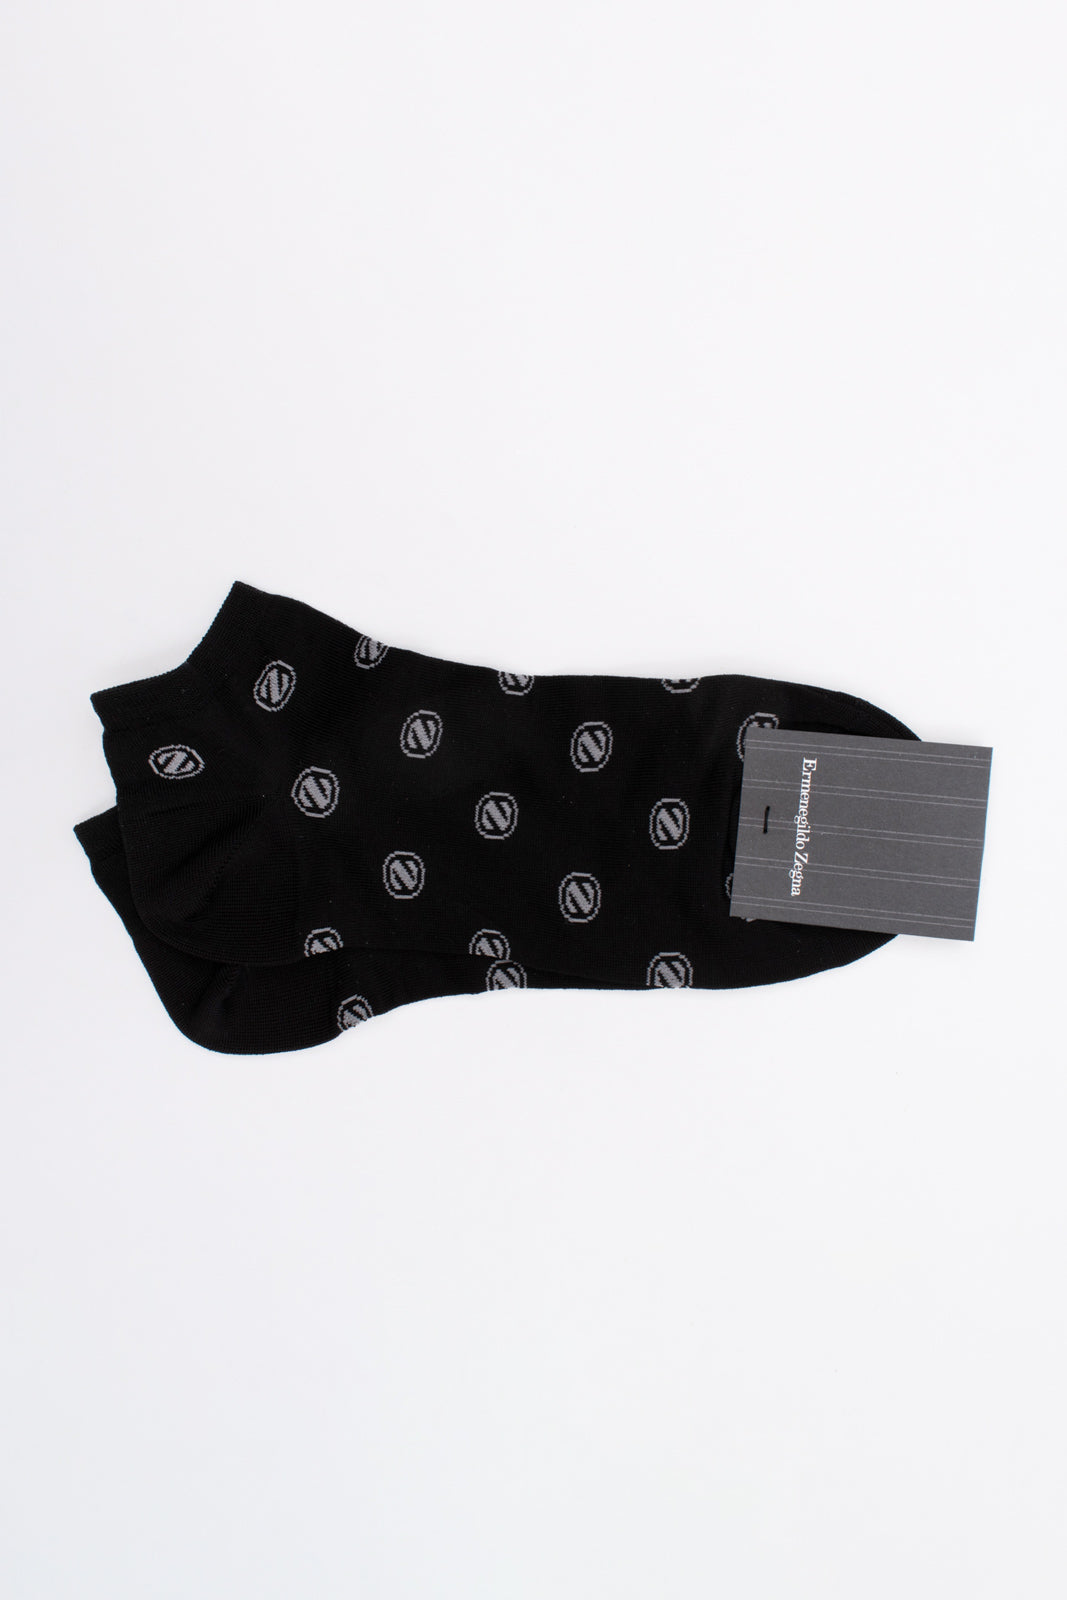 RRP€23 ZEGNA Sneakers Socks 39-42 UK5-8 US6-9 Logo Pattern Low Cut Made in Italy gallery main photo